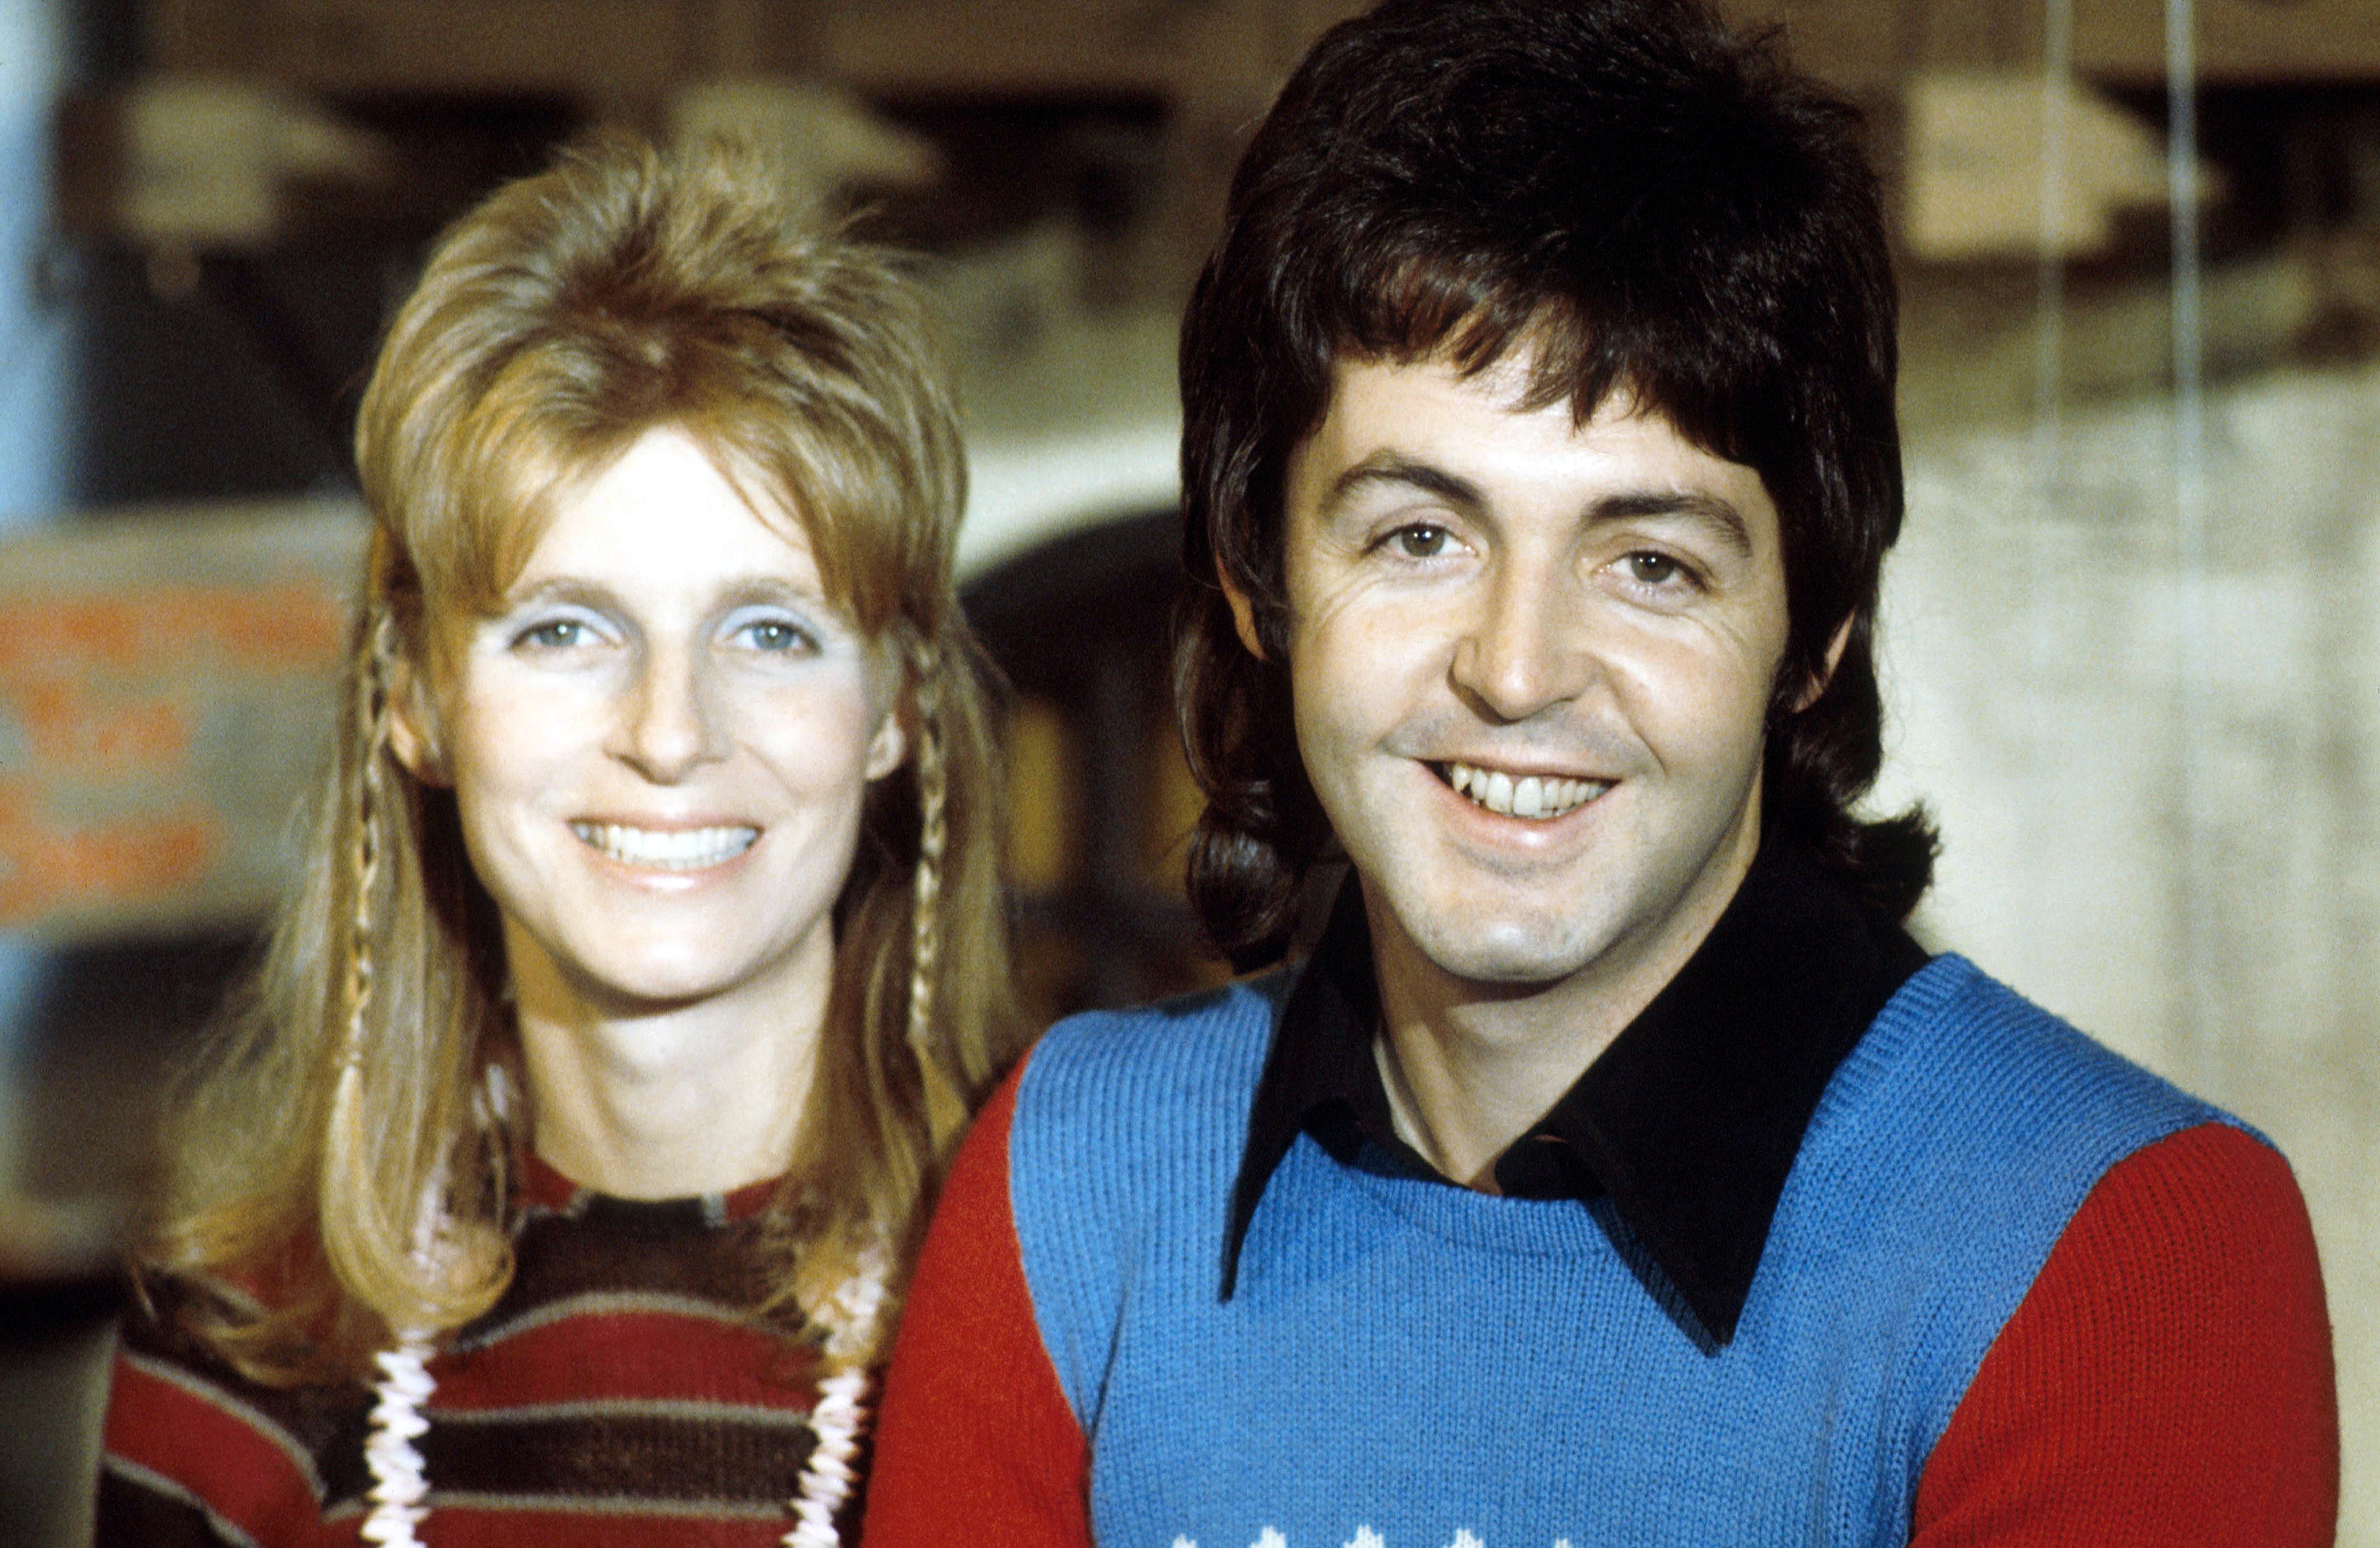 Linda McCartney (1941 - 1998) and husband Paul McCartney beaming in a photo captured in 1973 | Source: Getty Images